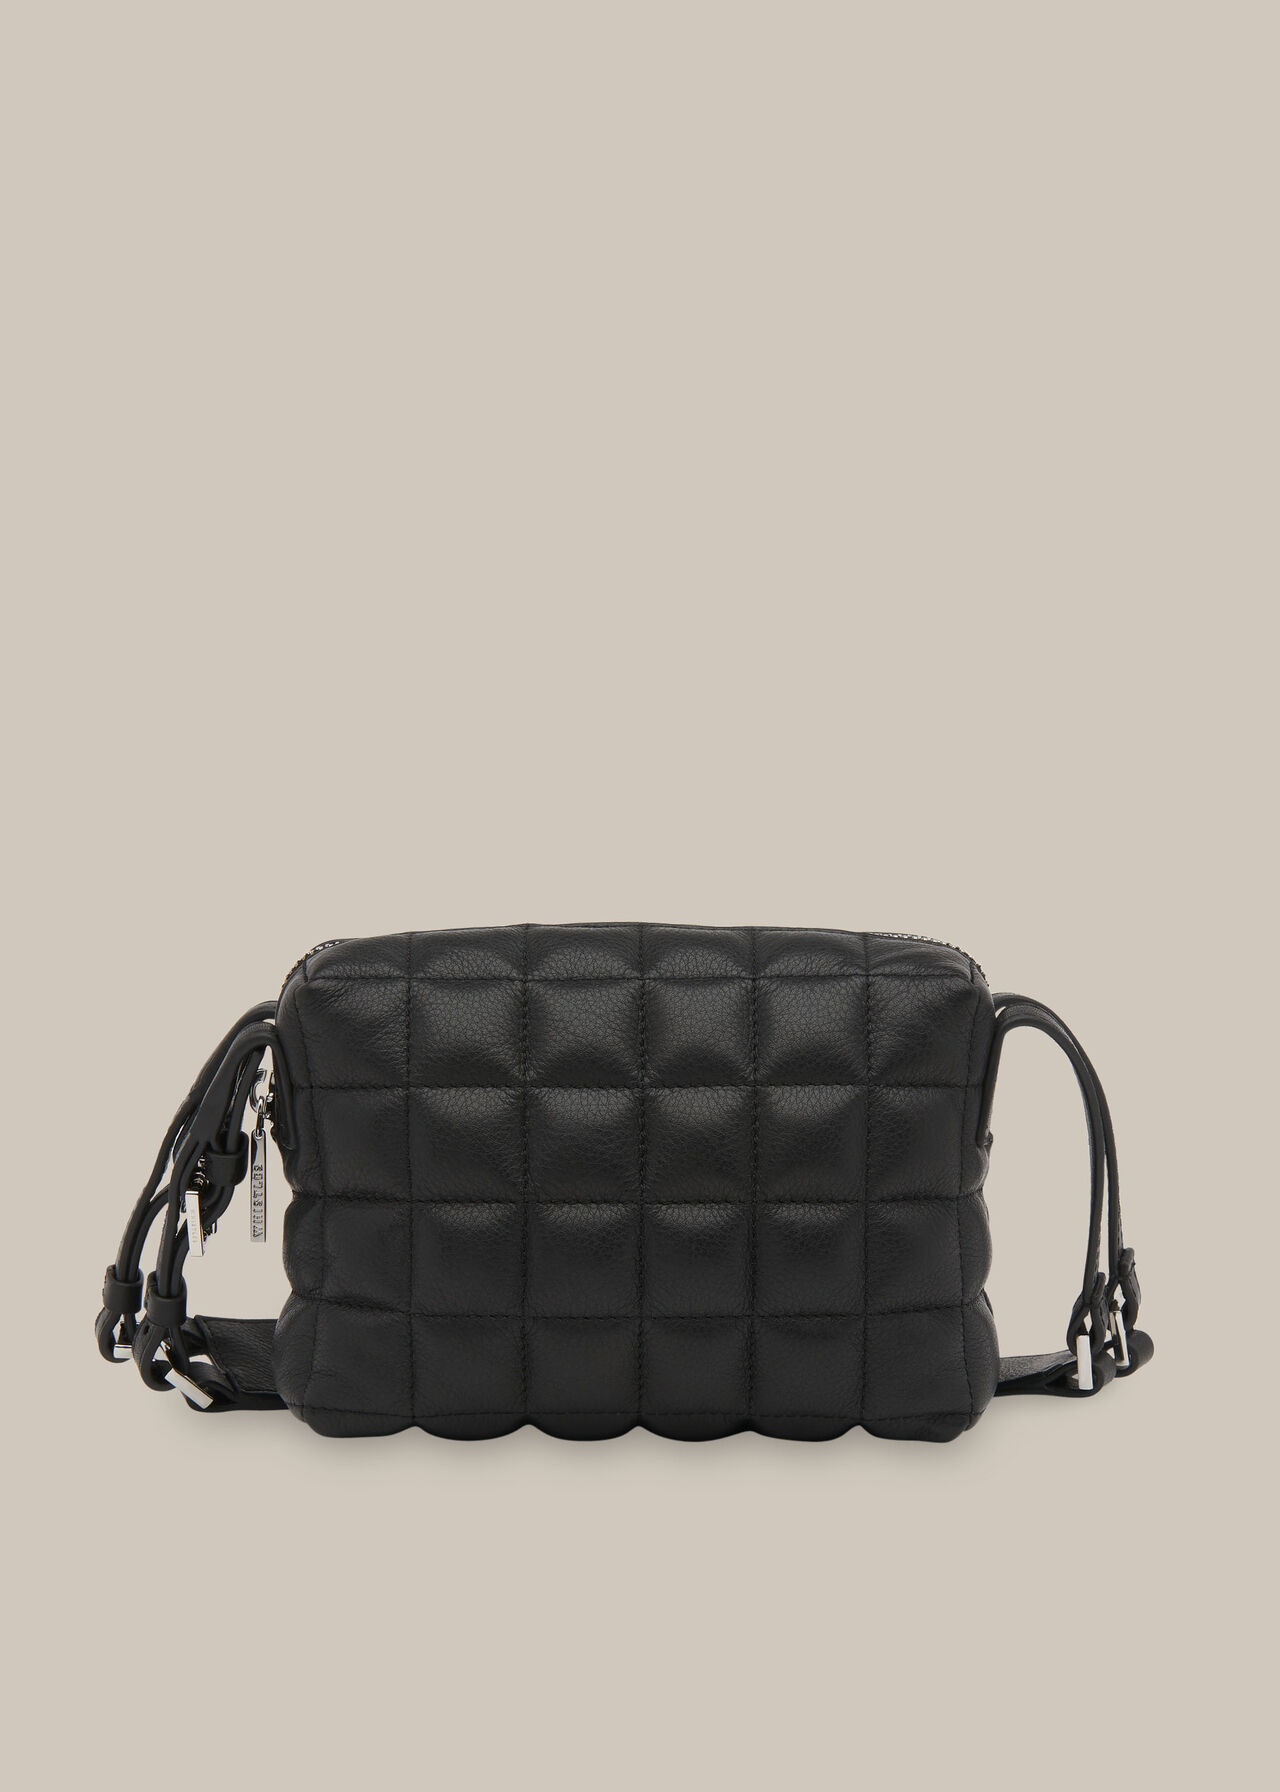 Black quilted cross body bag